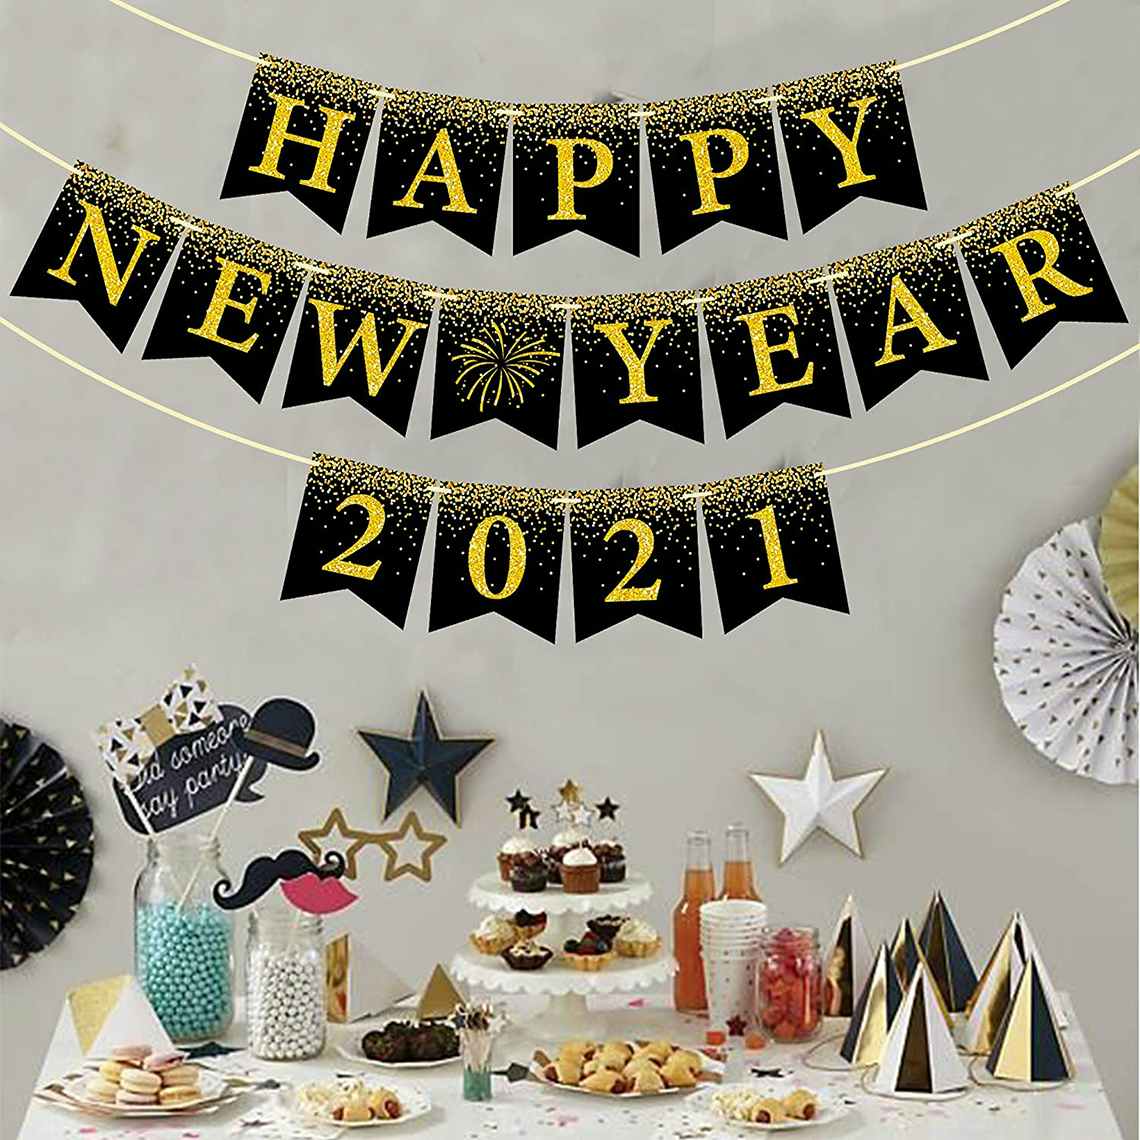 a wall with a happy new year 2021 sign and a table full of decor and food